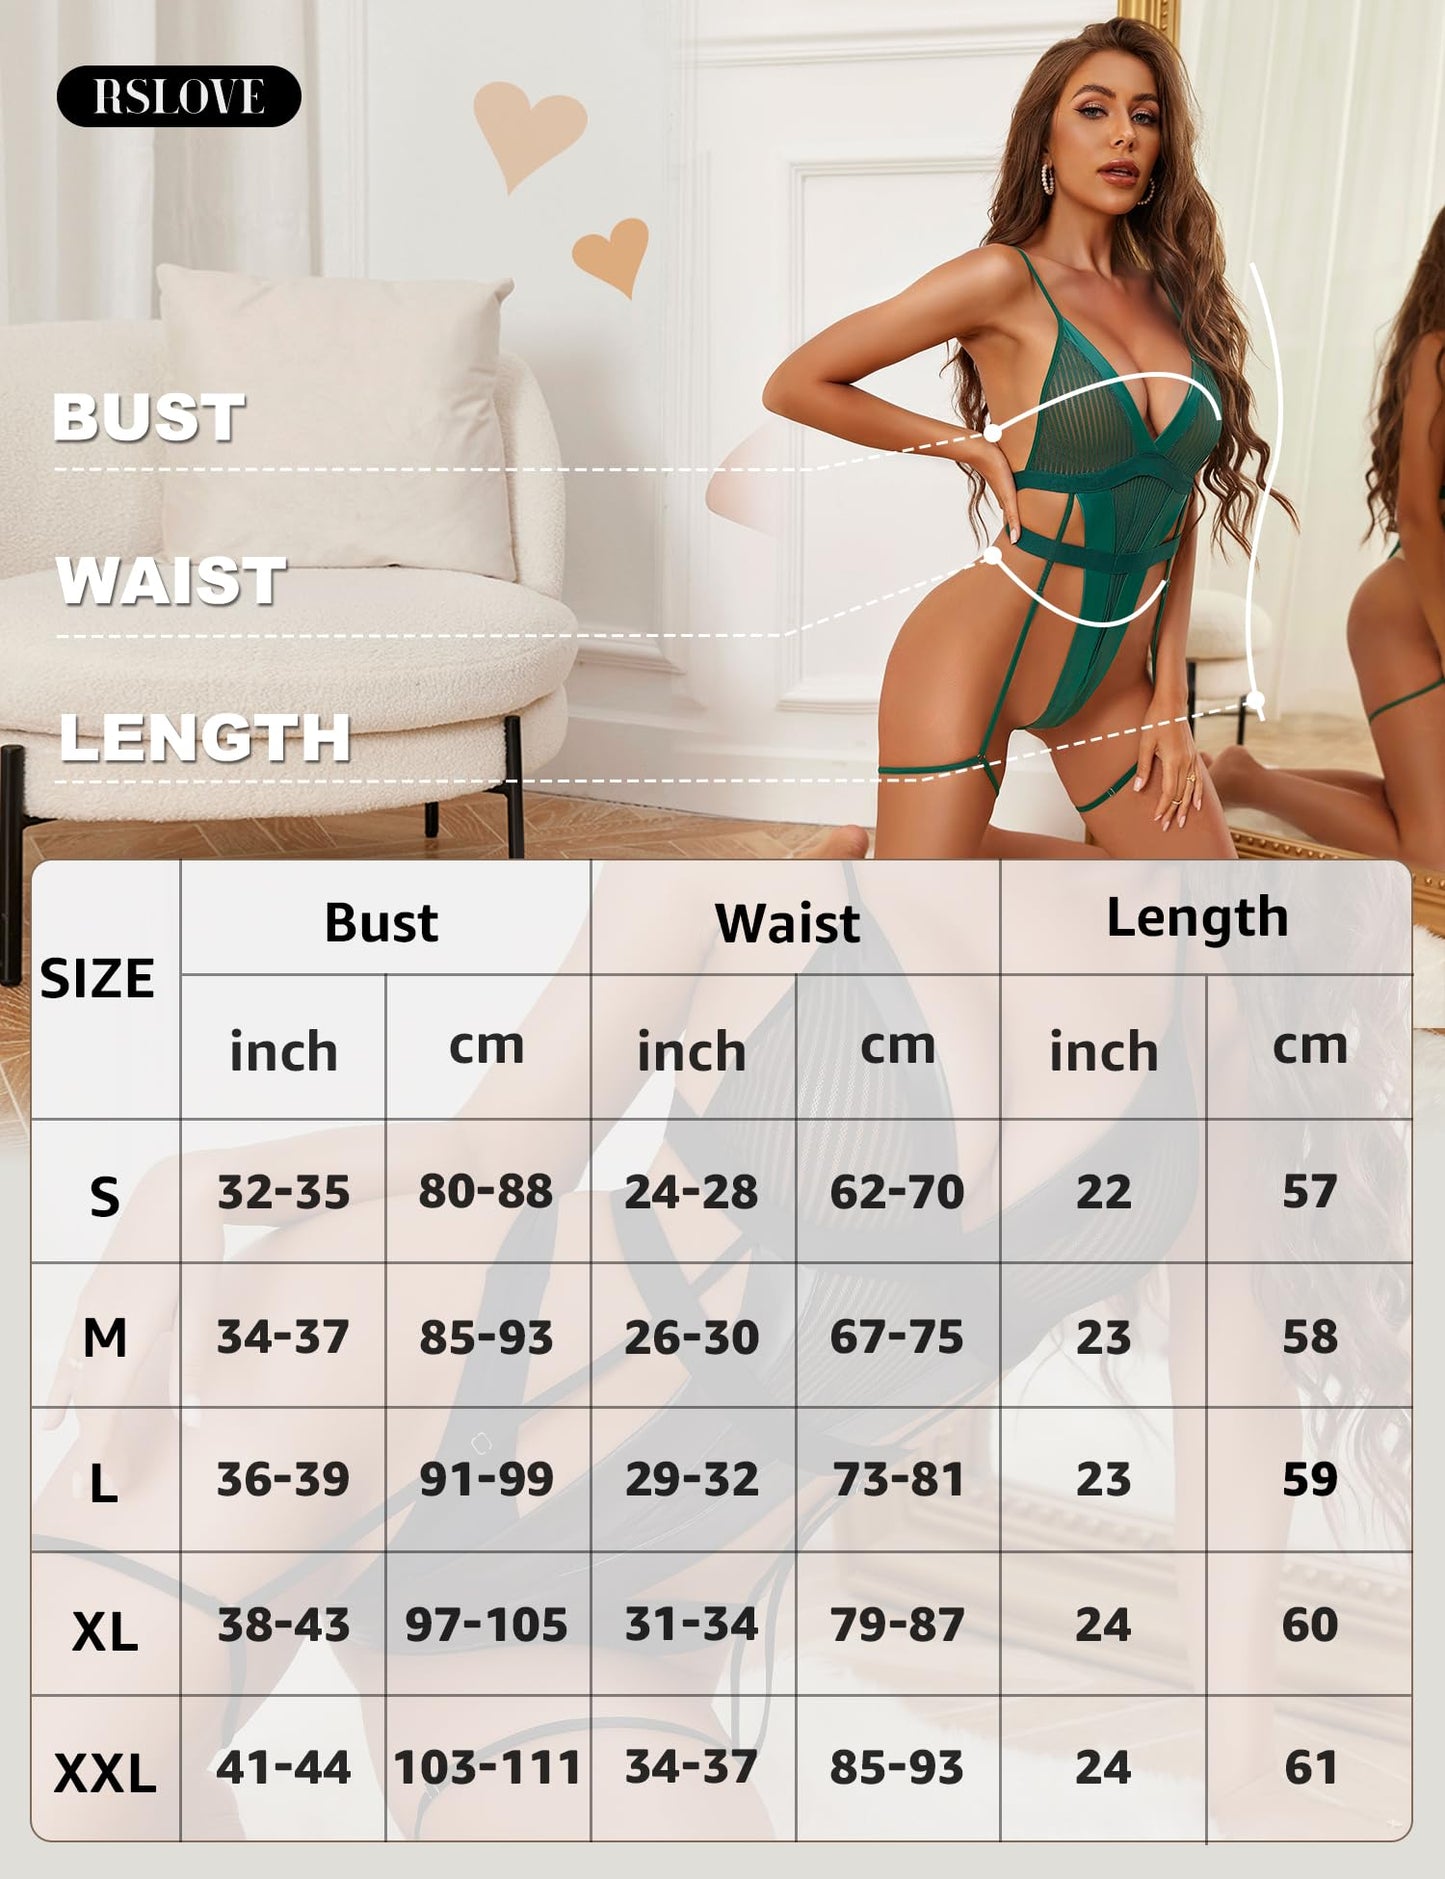 RSLOVE Teddy Lingerie for Women with Garter Belt One Piece Lingerie Sexy Strappy Lingerie Mesh Exotic Bodysuit Green Small